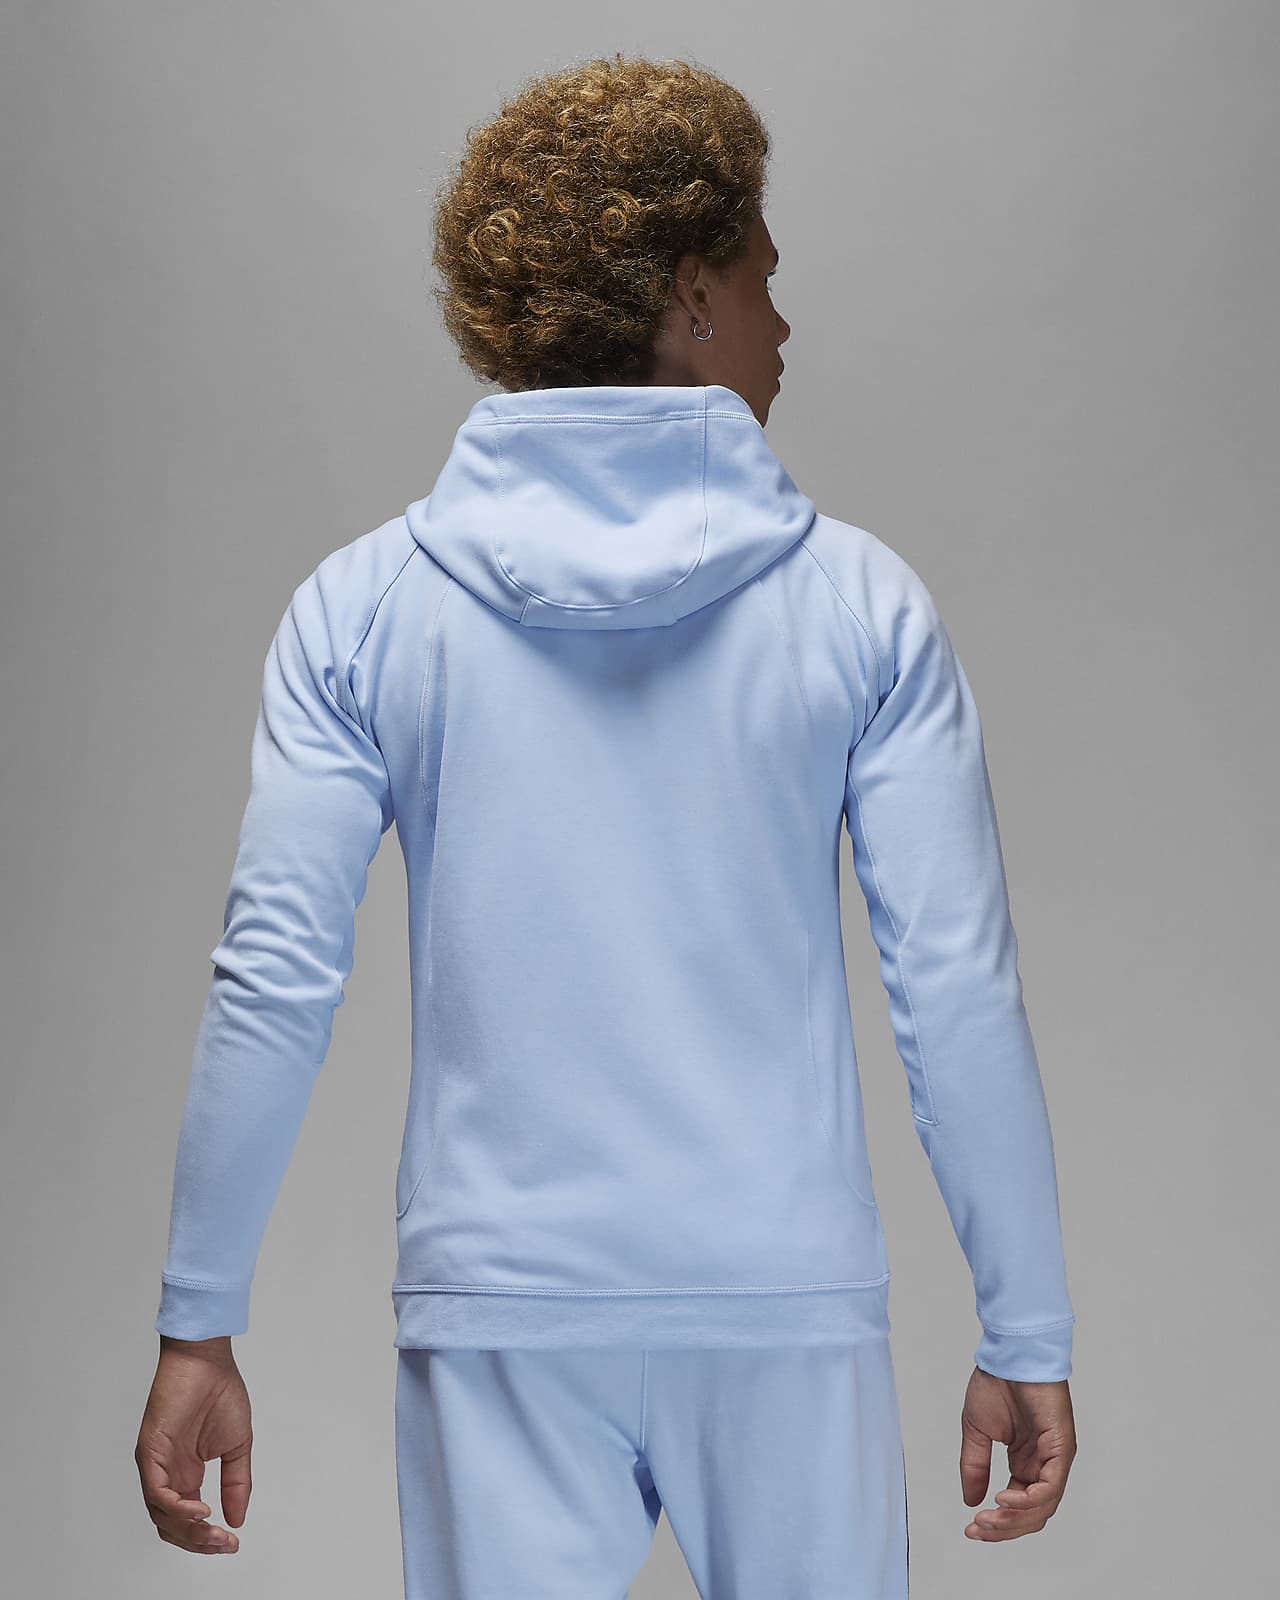 Men's Blue Under Armour Hoodies: 52 Items in Stock